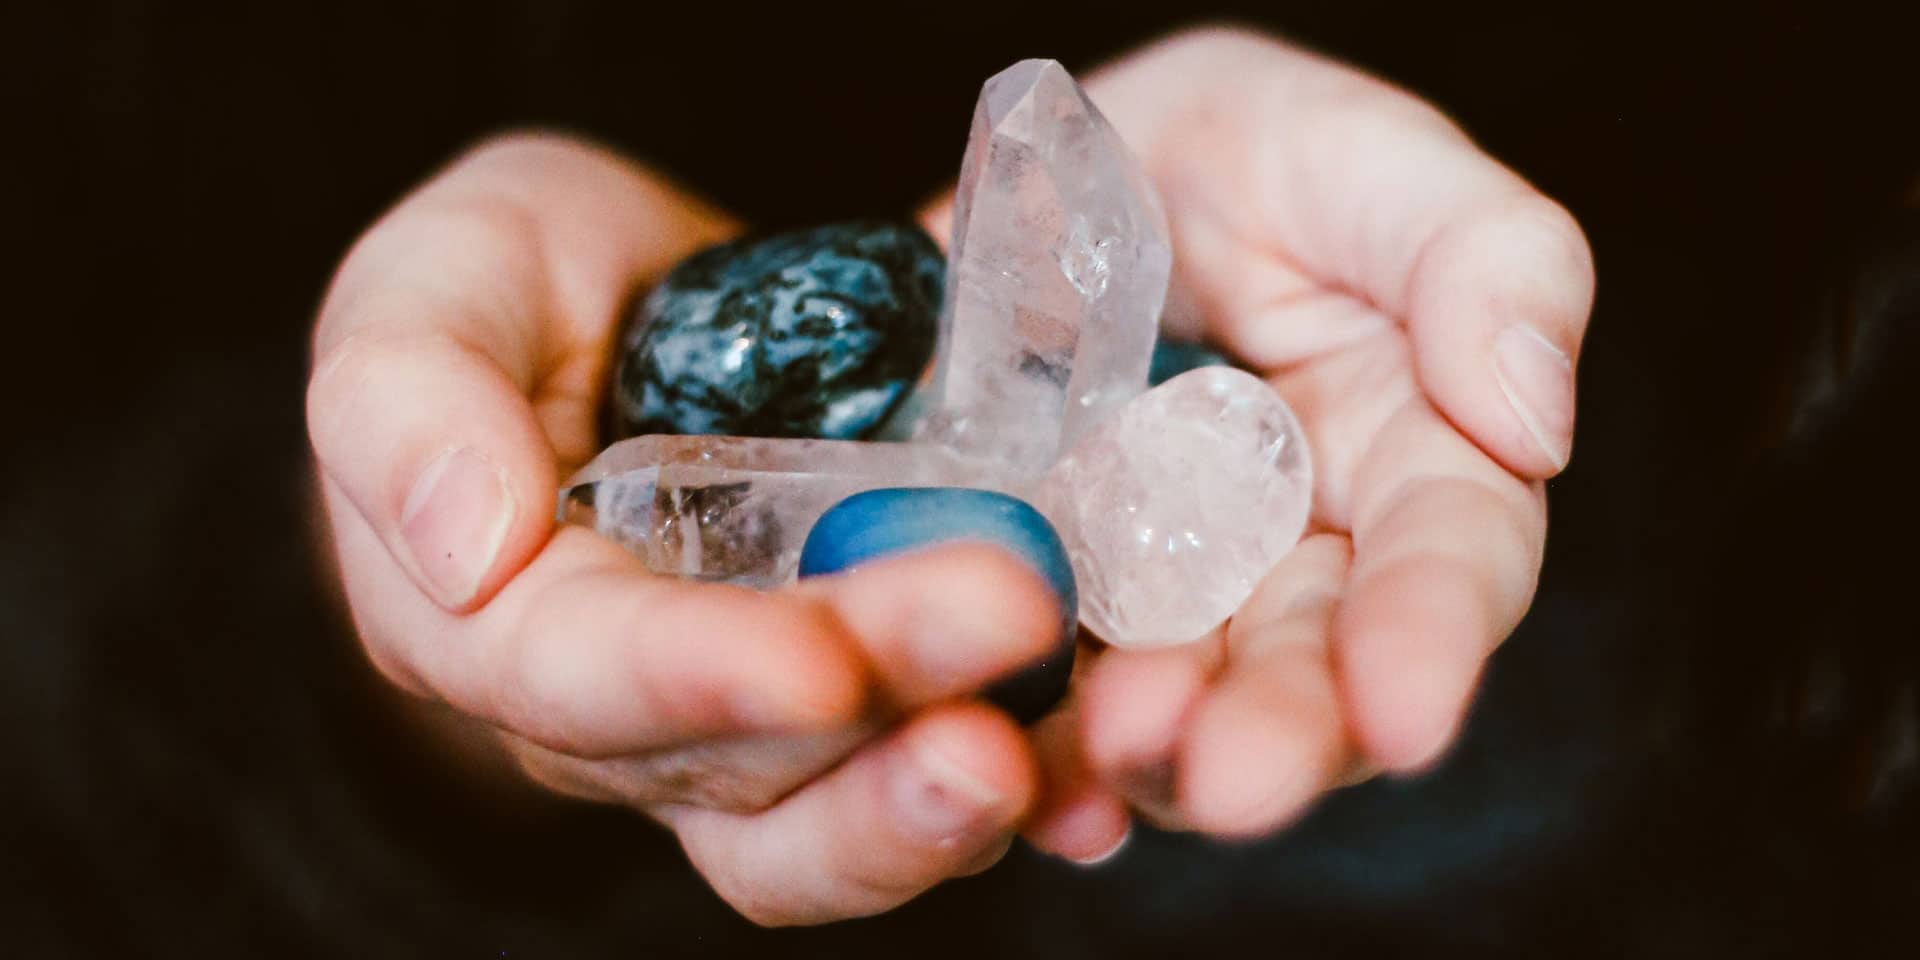 A close-up of a person's cupped hands gently holding a collection of various translucent and colored gemstones, radiating a witchy, metaphysical aura.